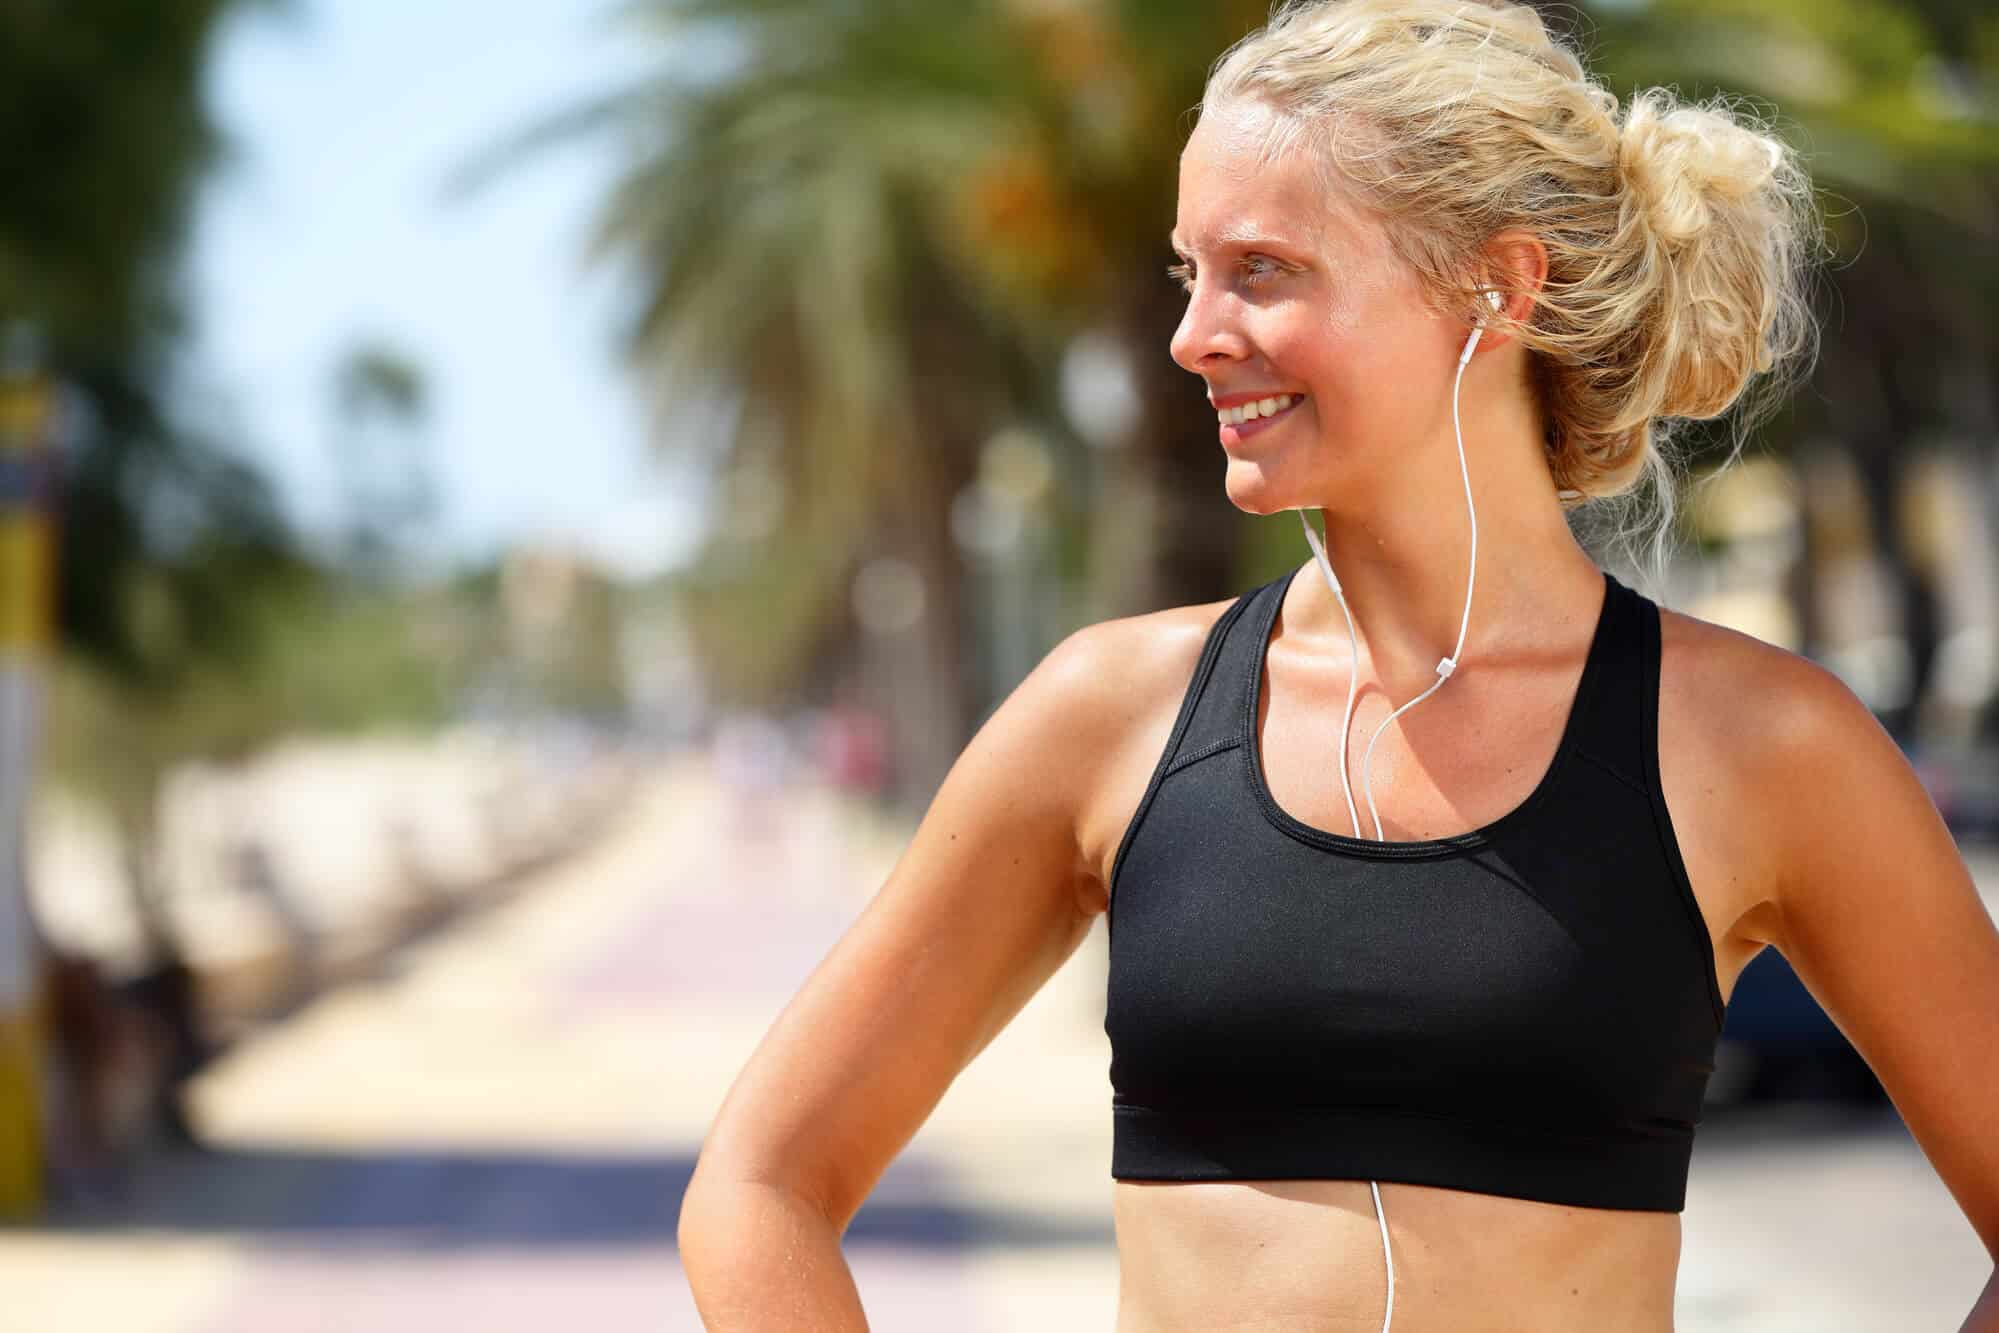 Woman runner listening to music in earbuds